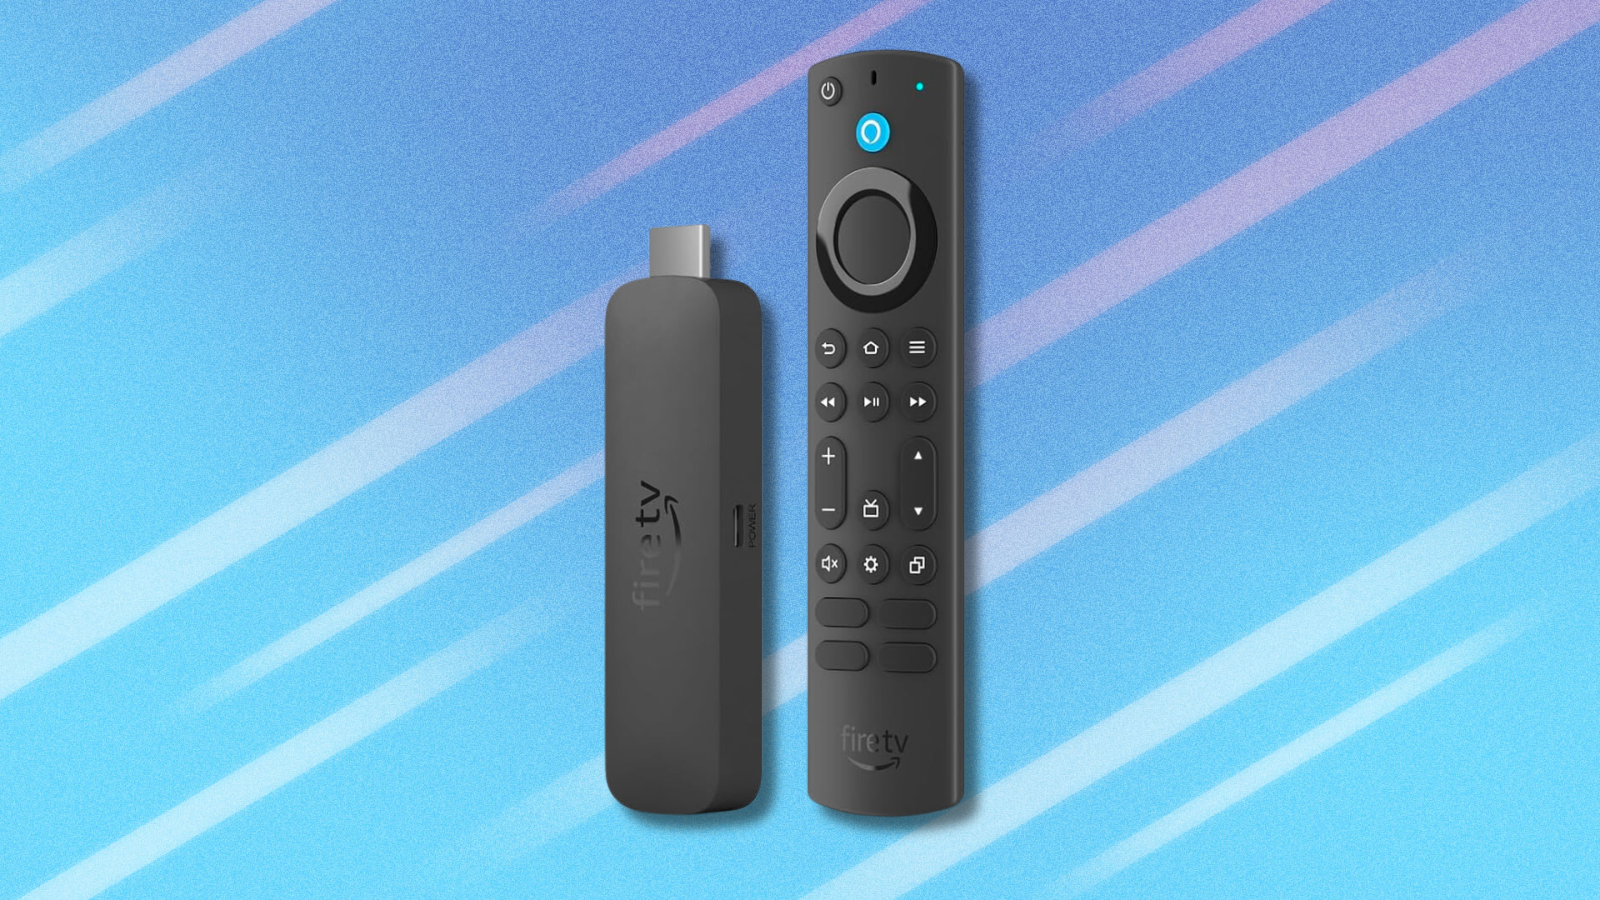 Amazon Fire TV Stick 4K Max on blue abstract background